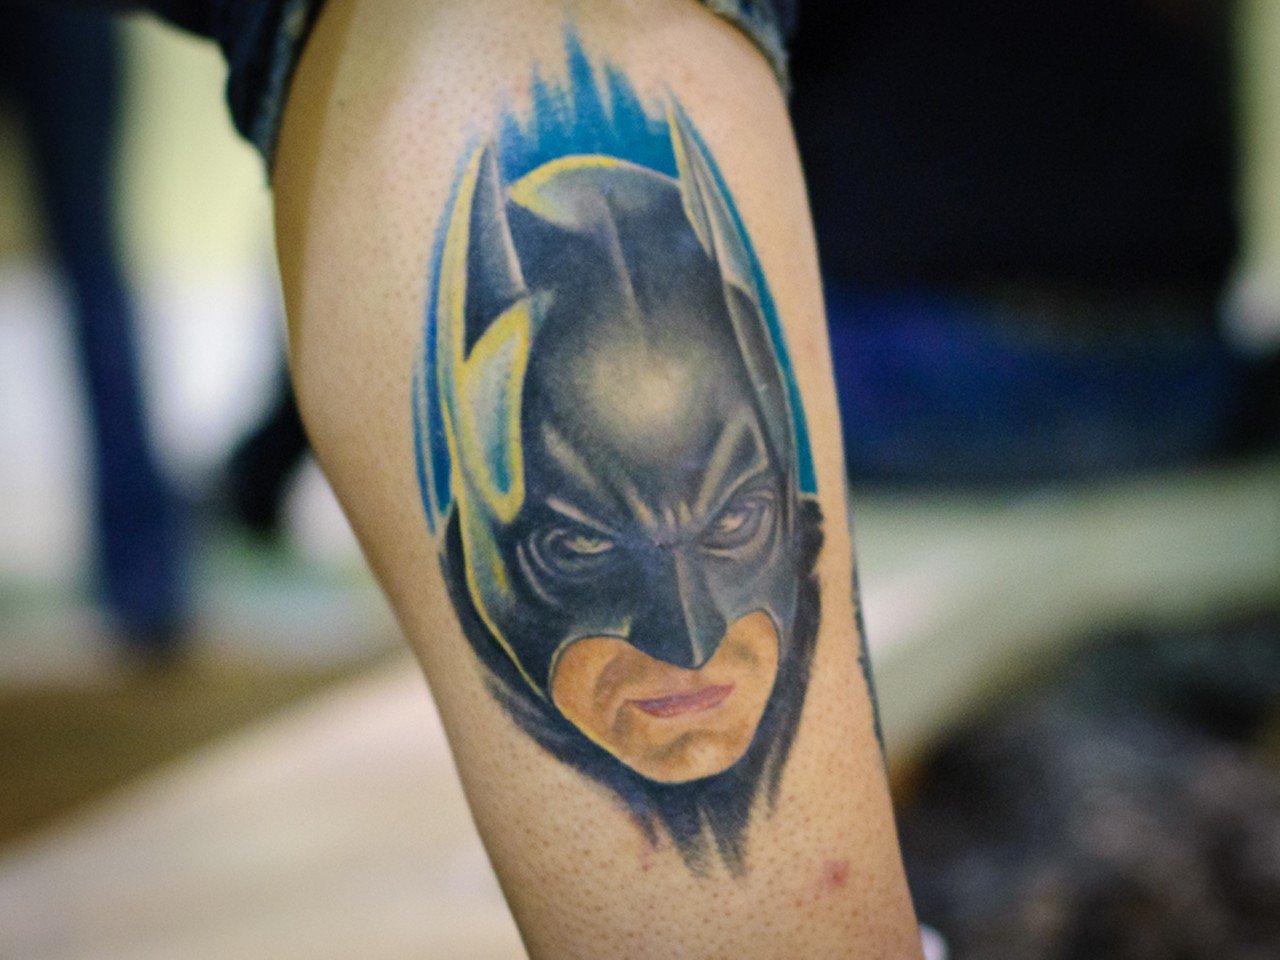 Josh Pruitt's Batman. How did he get so many? "Become friends with the tattoo artist."